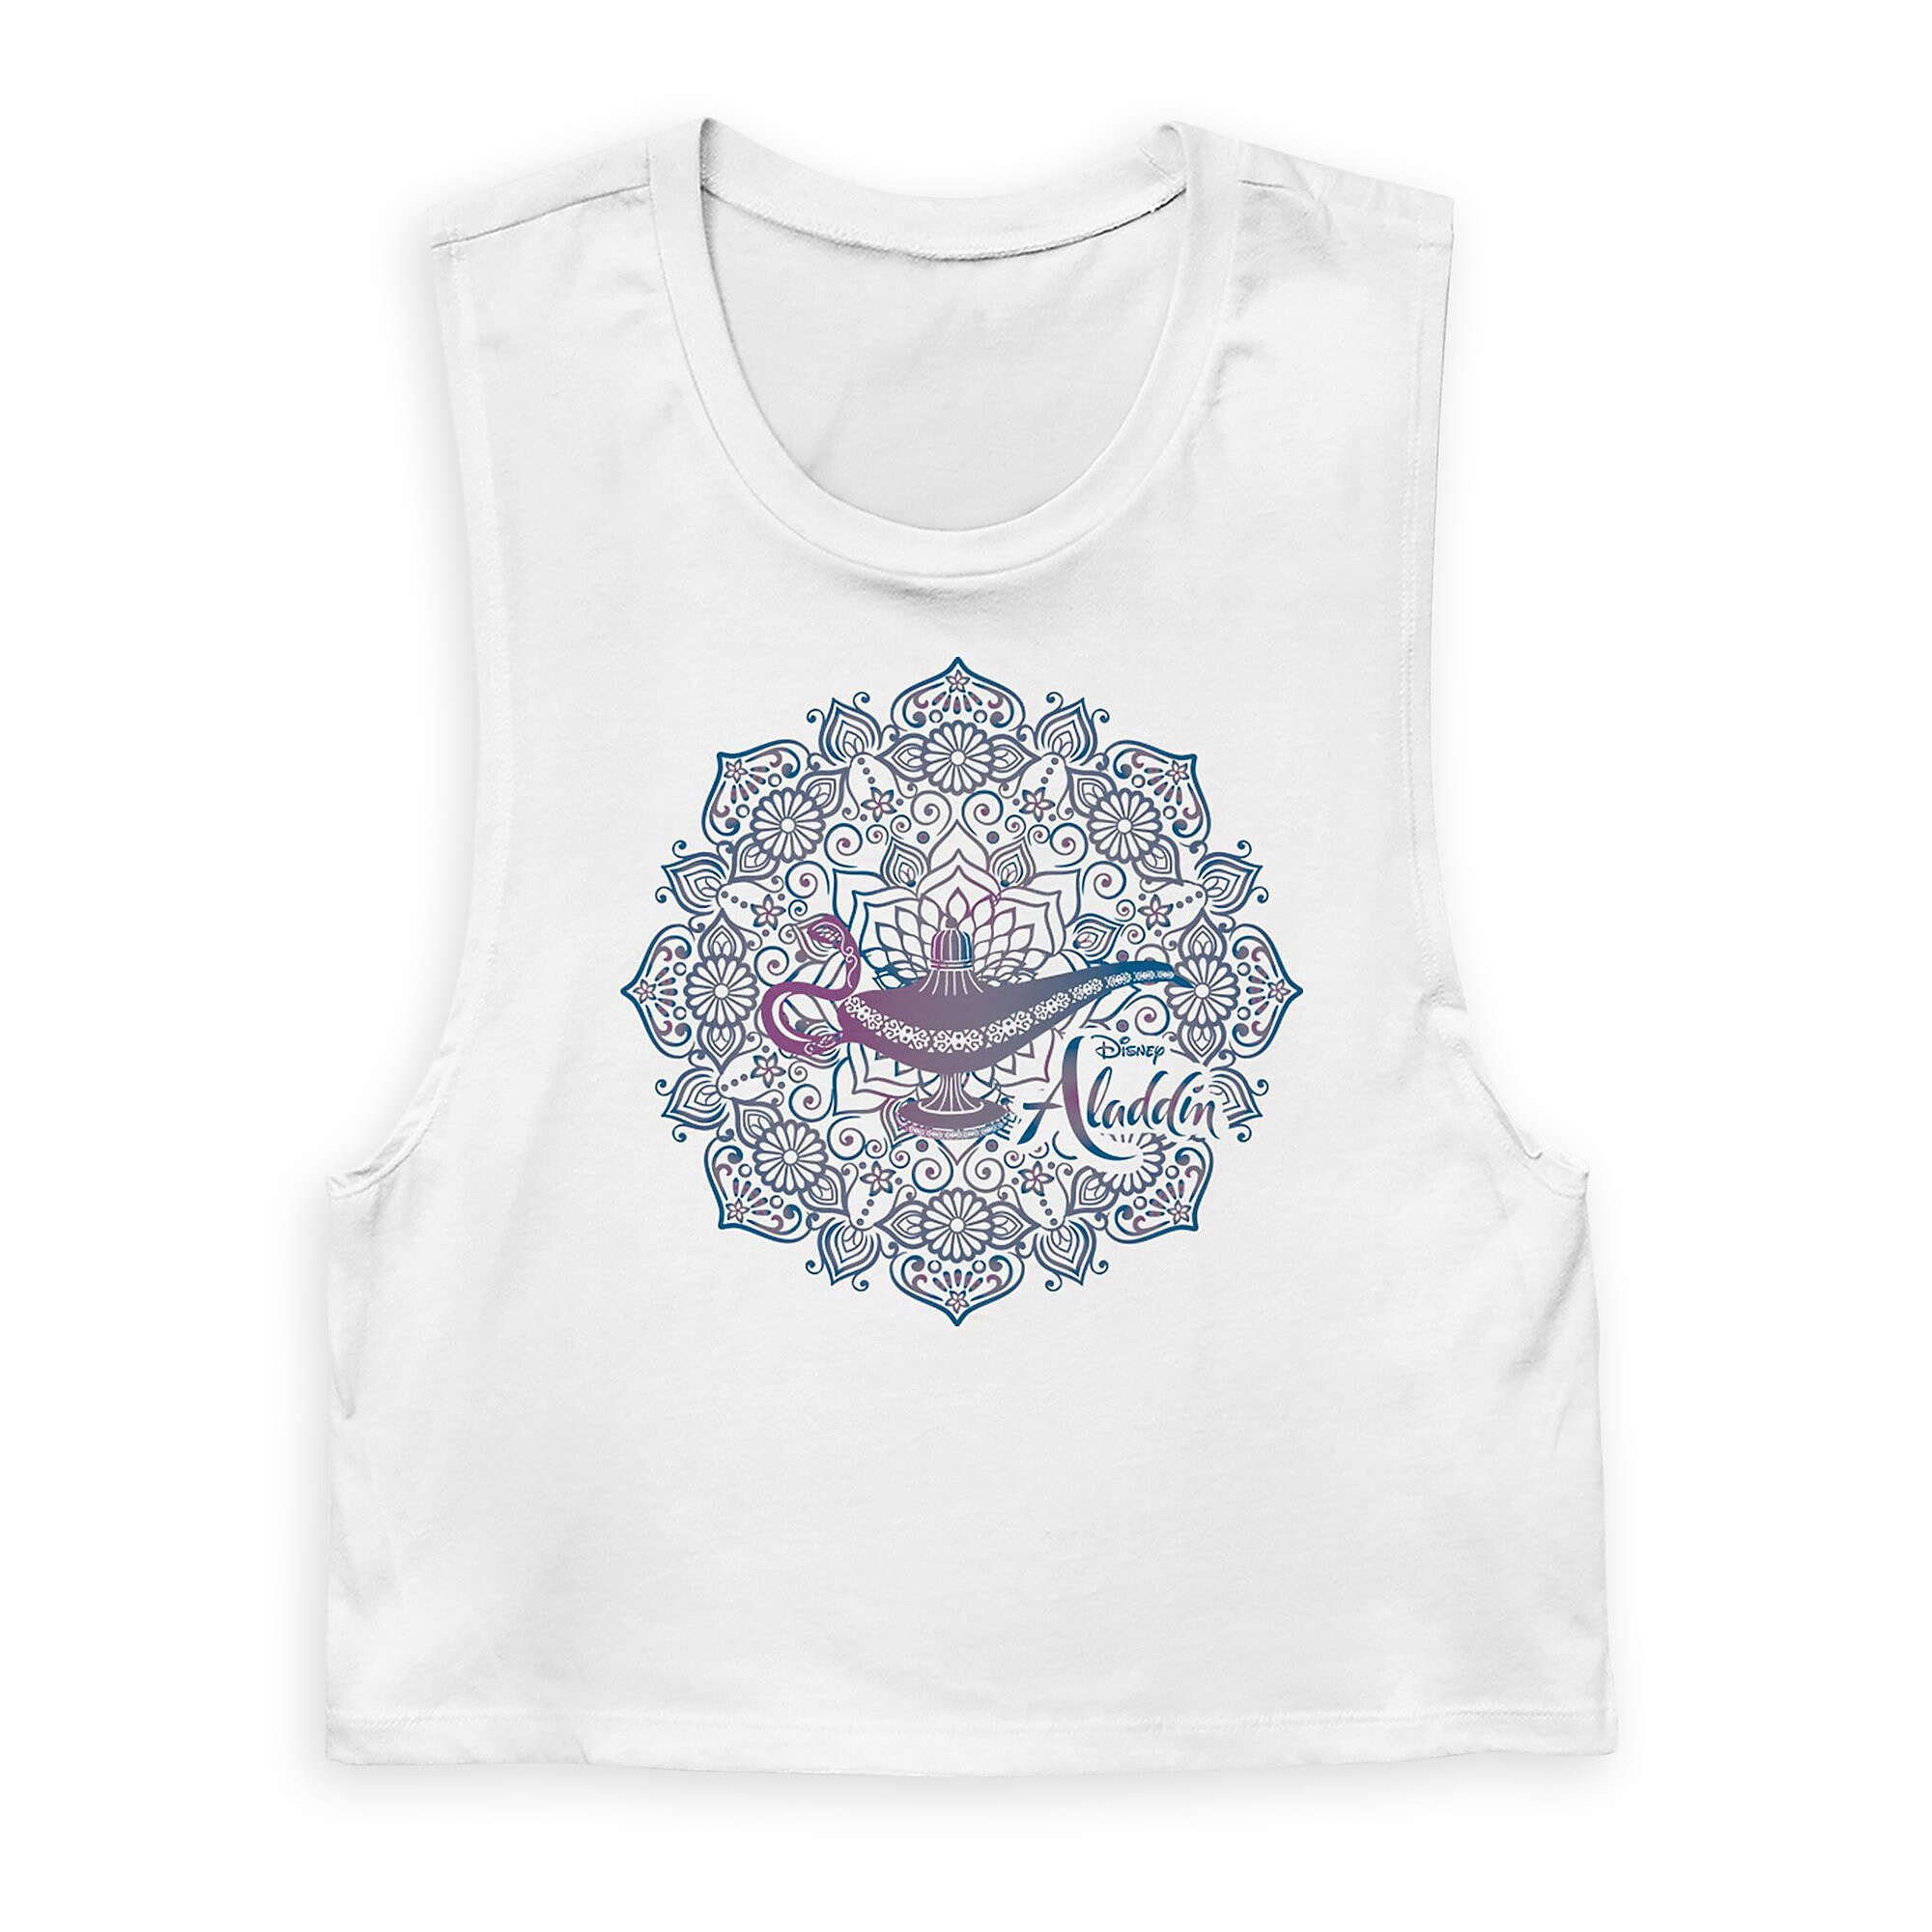 Magic Lamp Cropped Tank Top for Juniors - Aladdin - Live Action Film